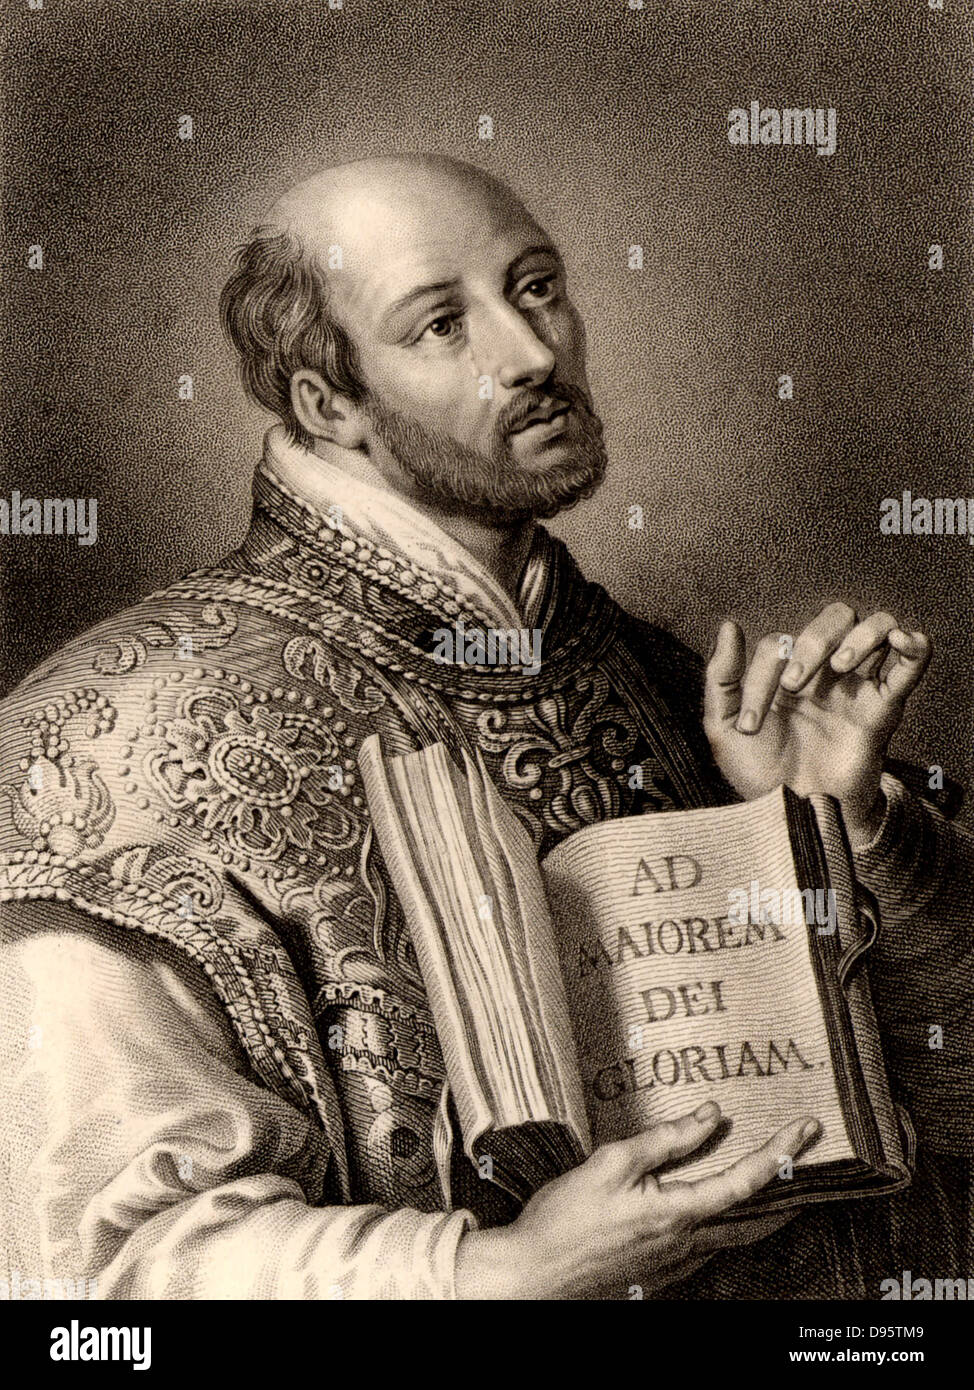 Ignatius Loyola, born Inigo Lopez de Recalde (1491-1556) Spanish soldier and, with St Francis Xavier (1506-1552) in 1534, one of the founders of the Society of Jesus, the Jesuits.  Engraving from 'The Gallery of Portraits' Vol. VII  by Charles Knight (London, 1837). Stock Photo